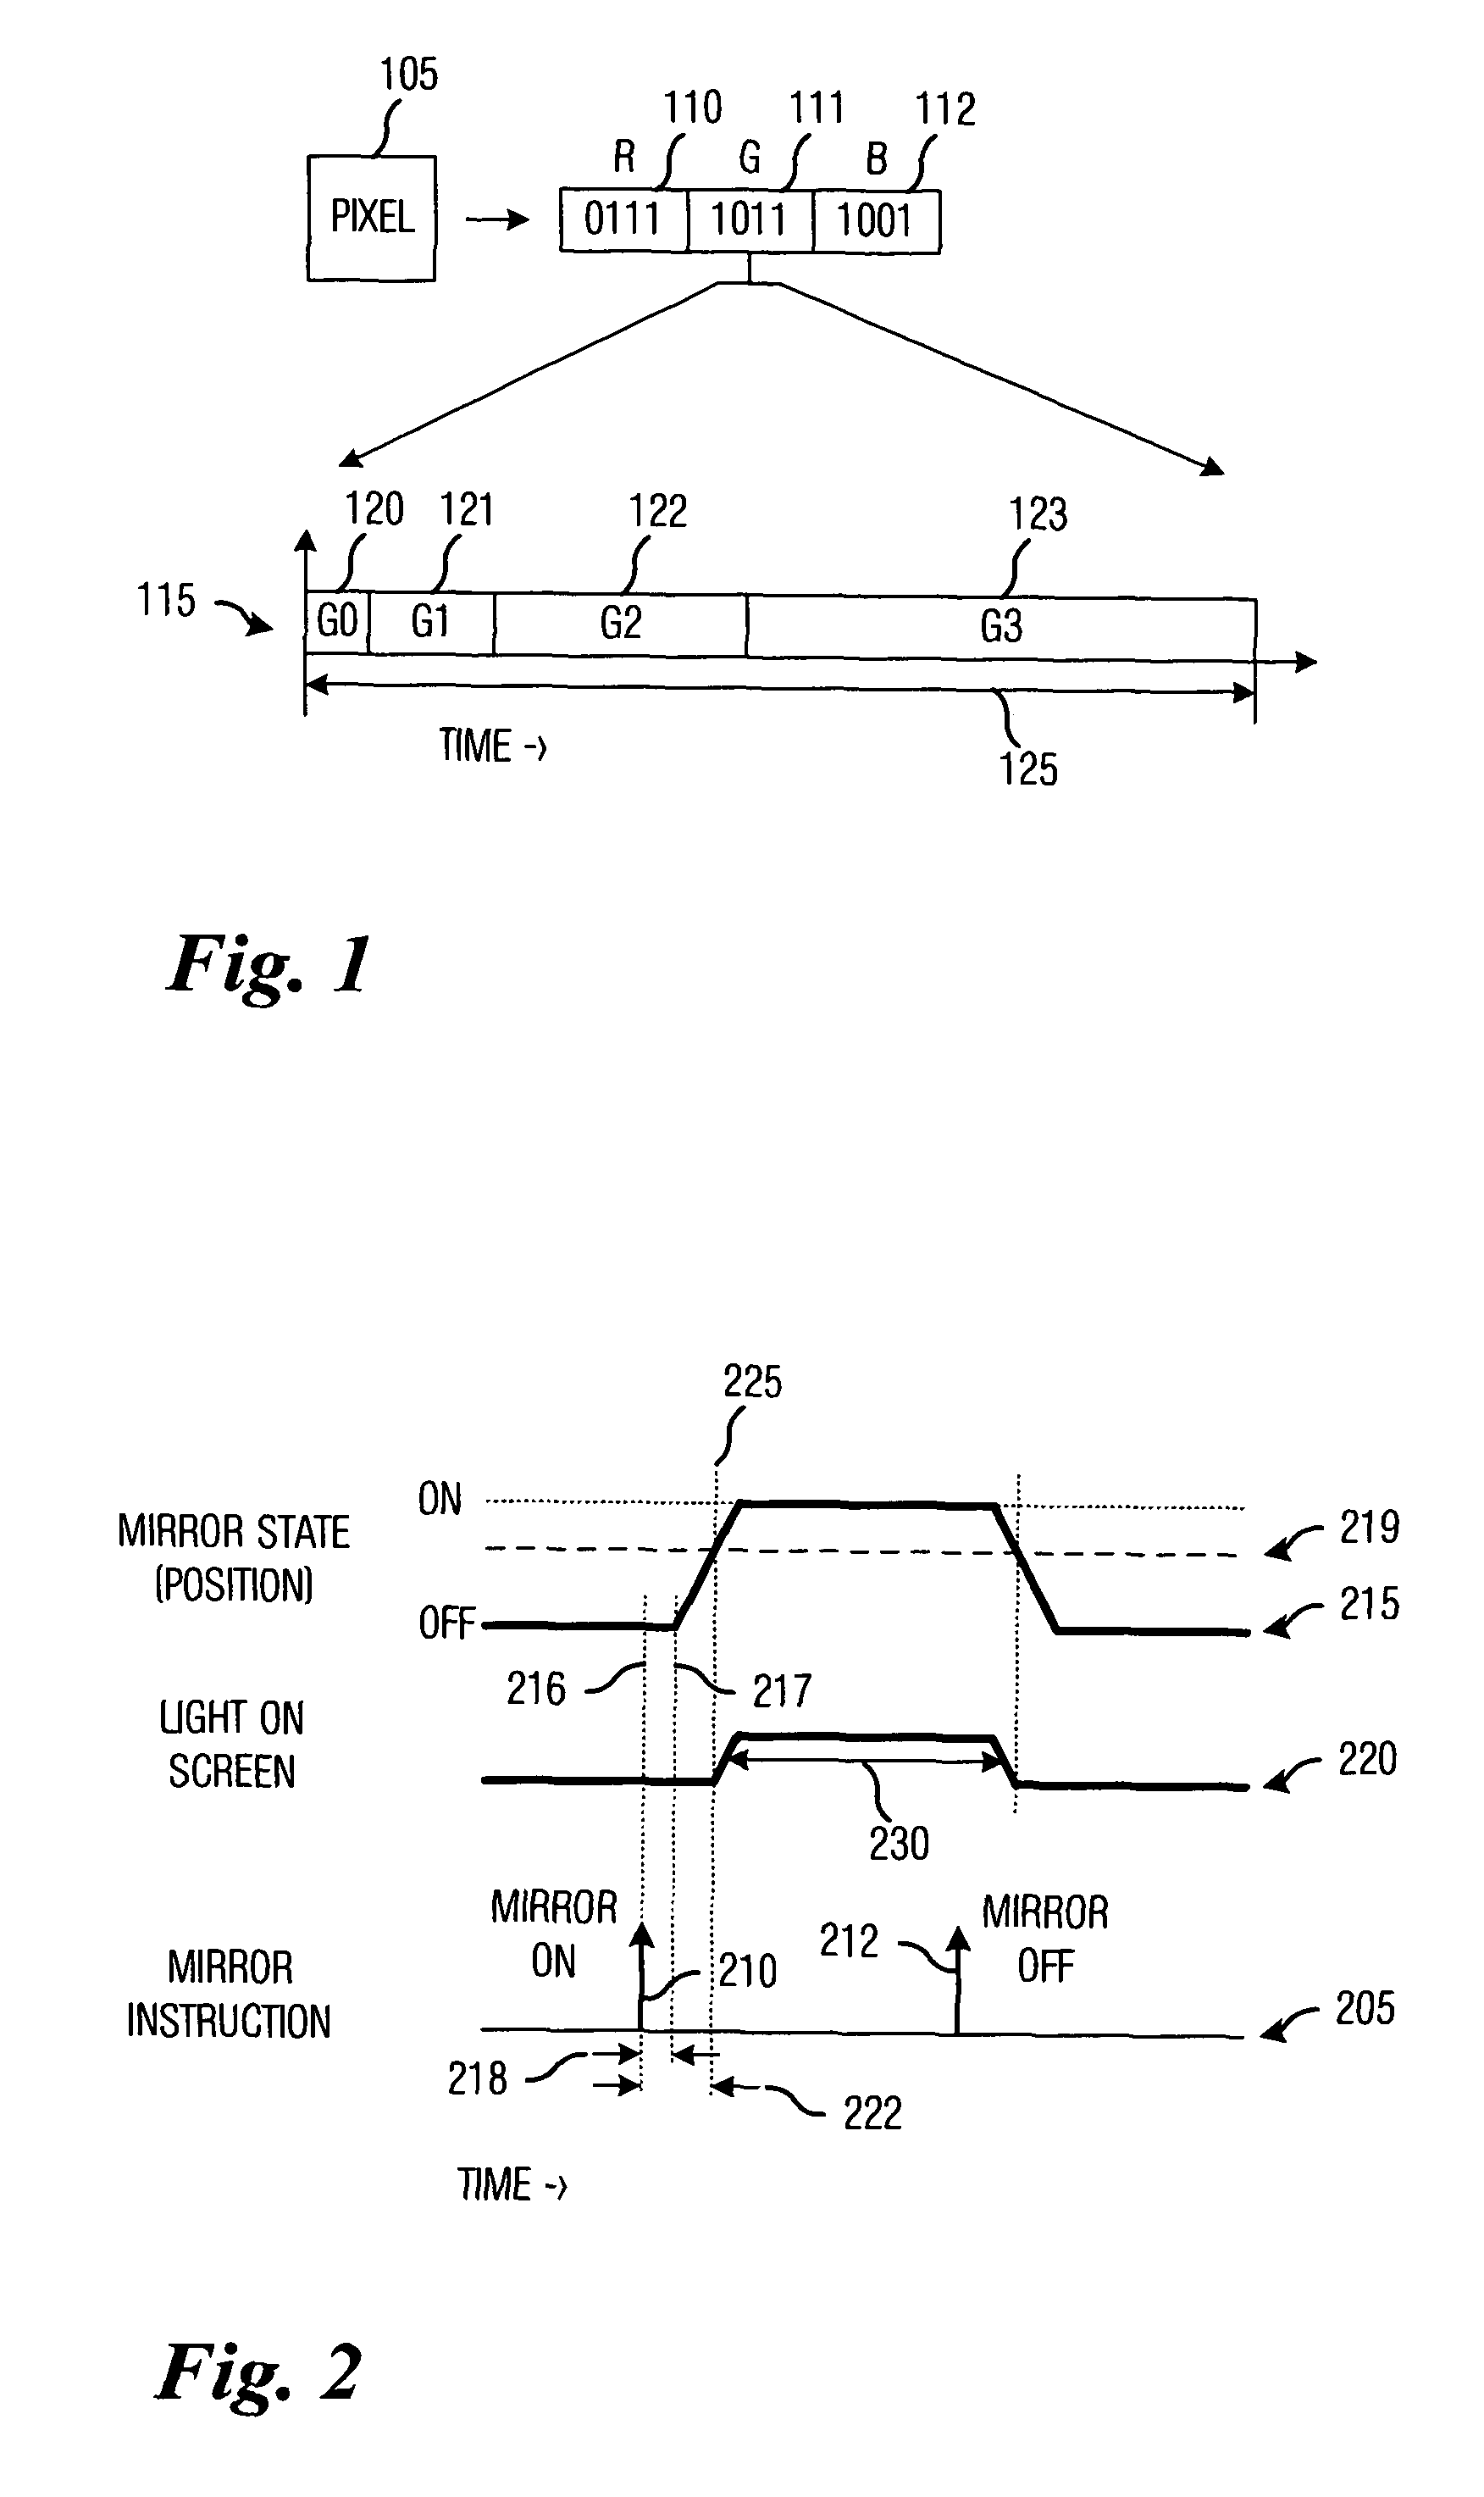 Increased intensity resolution for pulse-width modulation-based displays with light emitting diode illumination